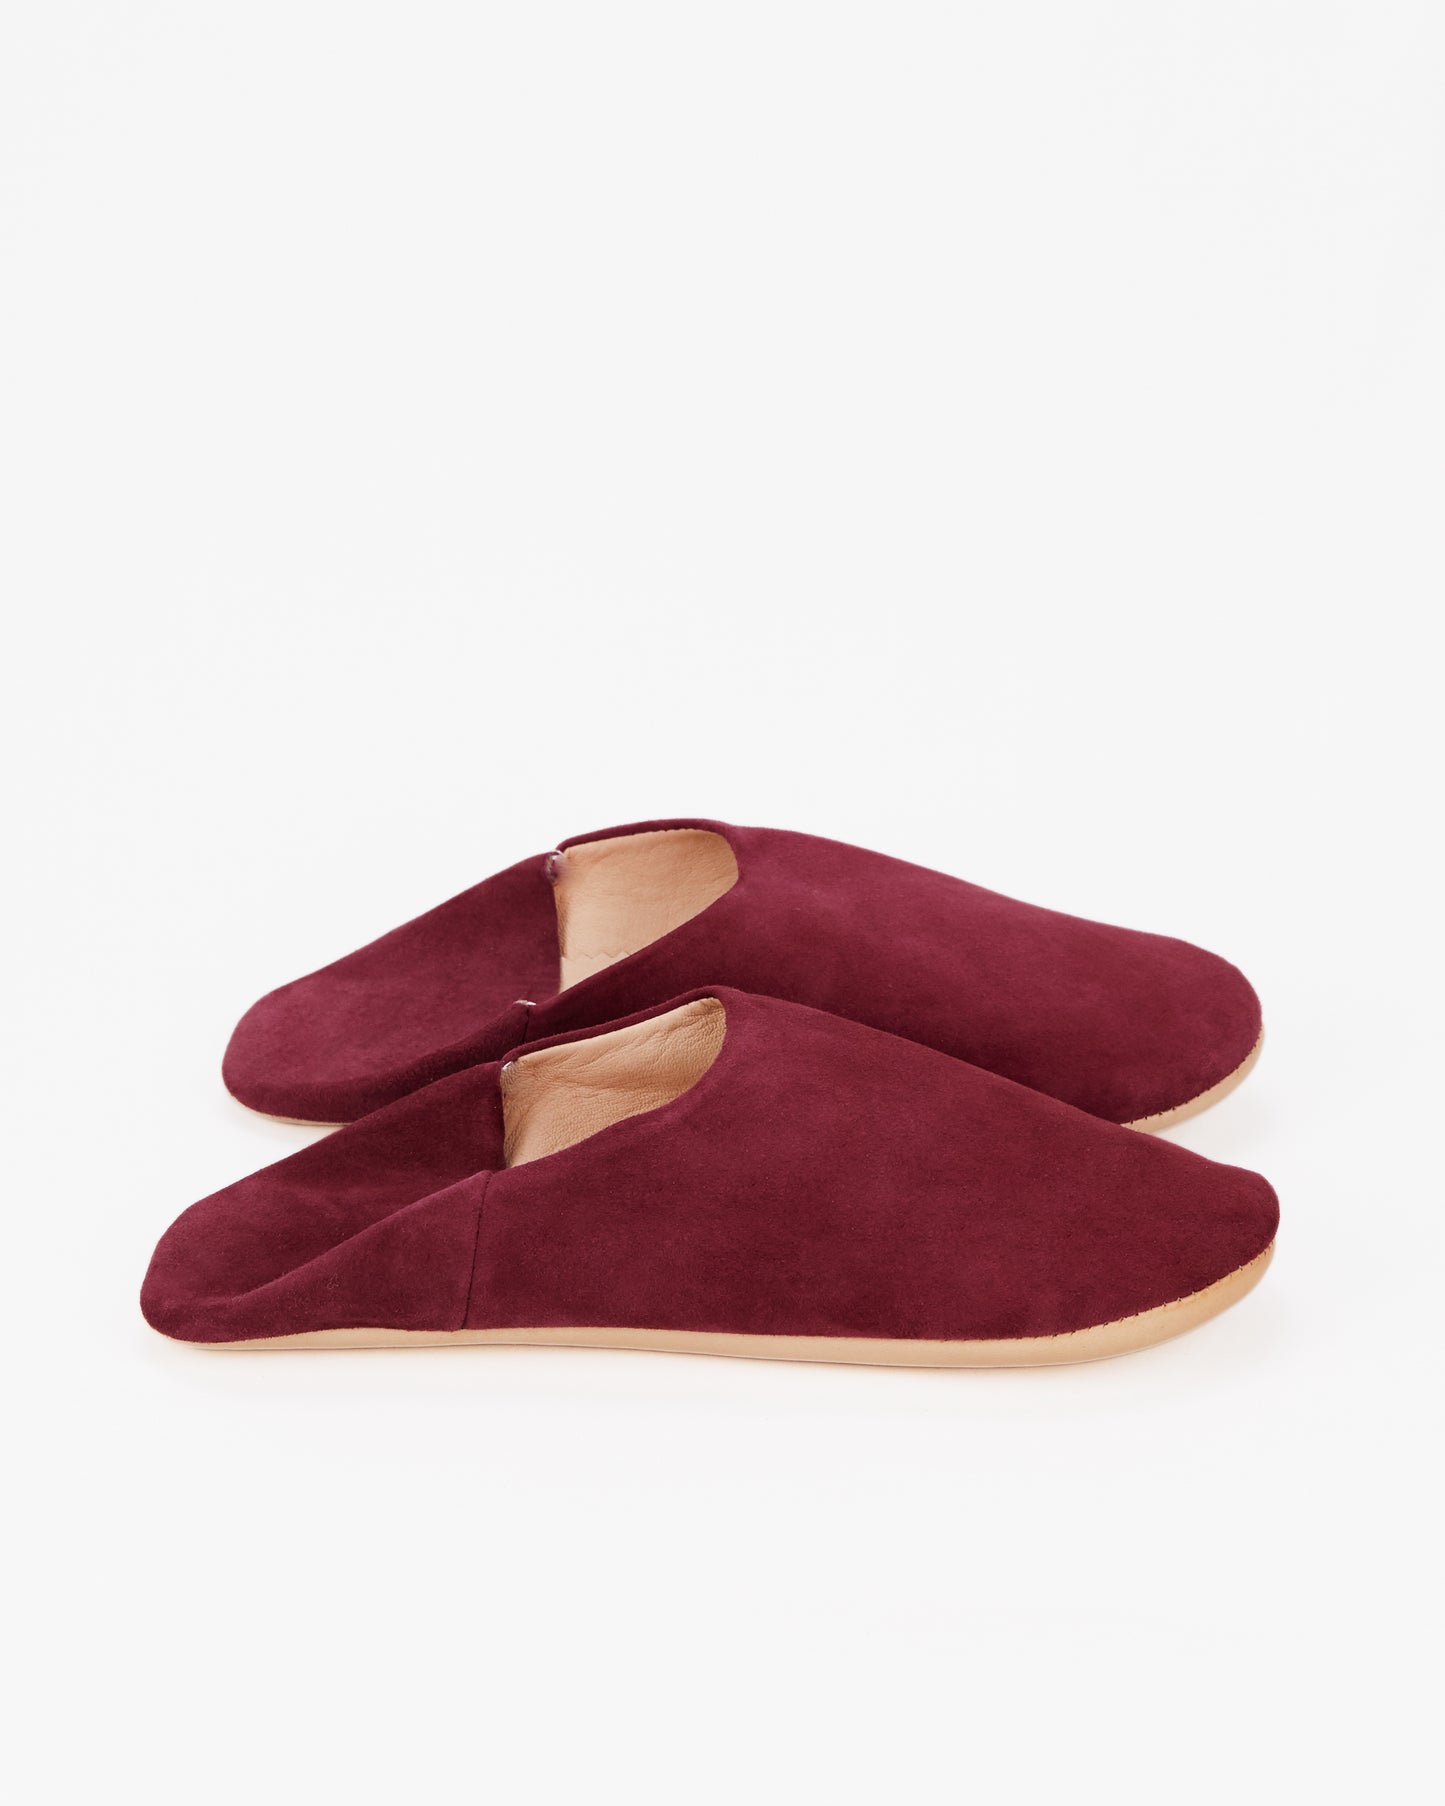 Moroccan Slippers, Red